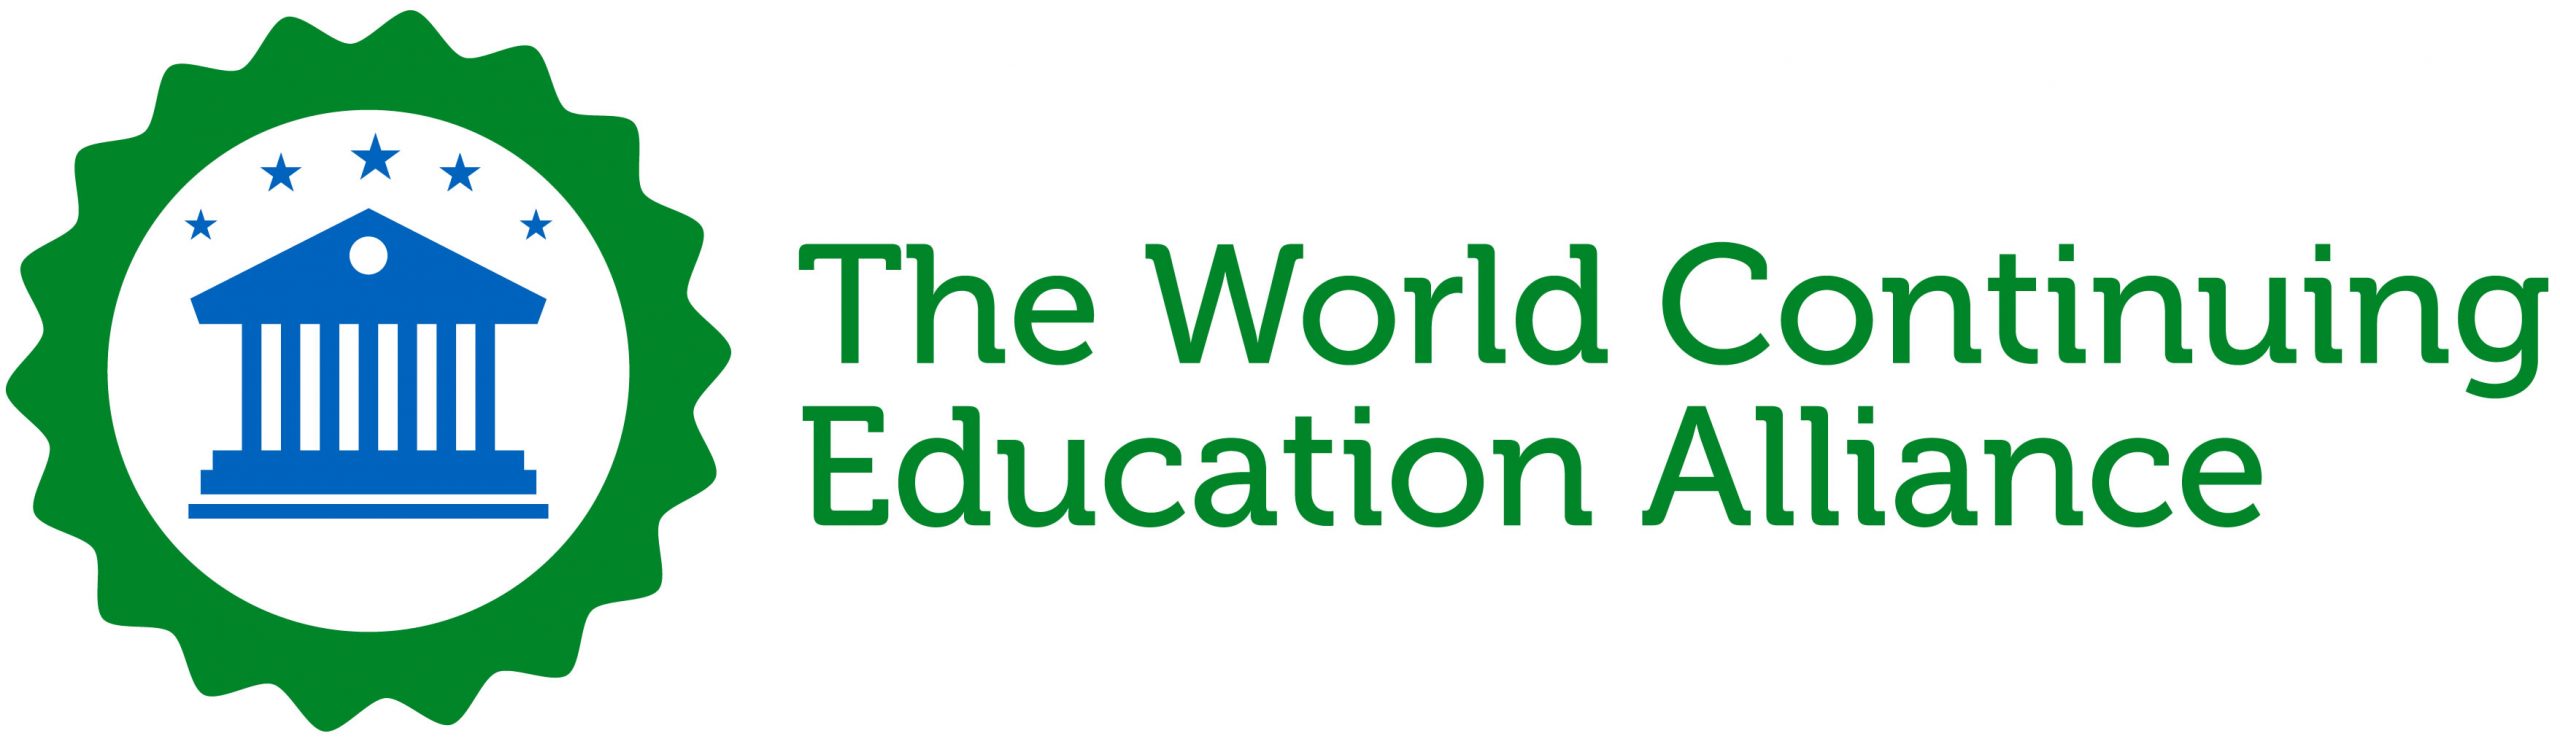 The World Continuing Education Alliance